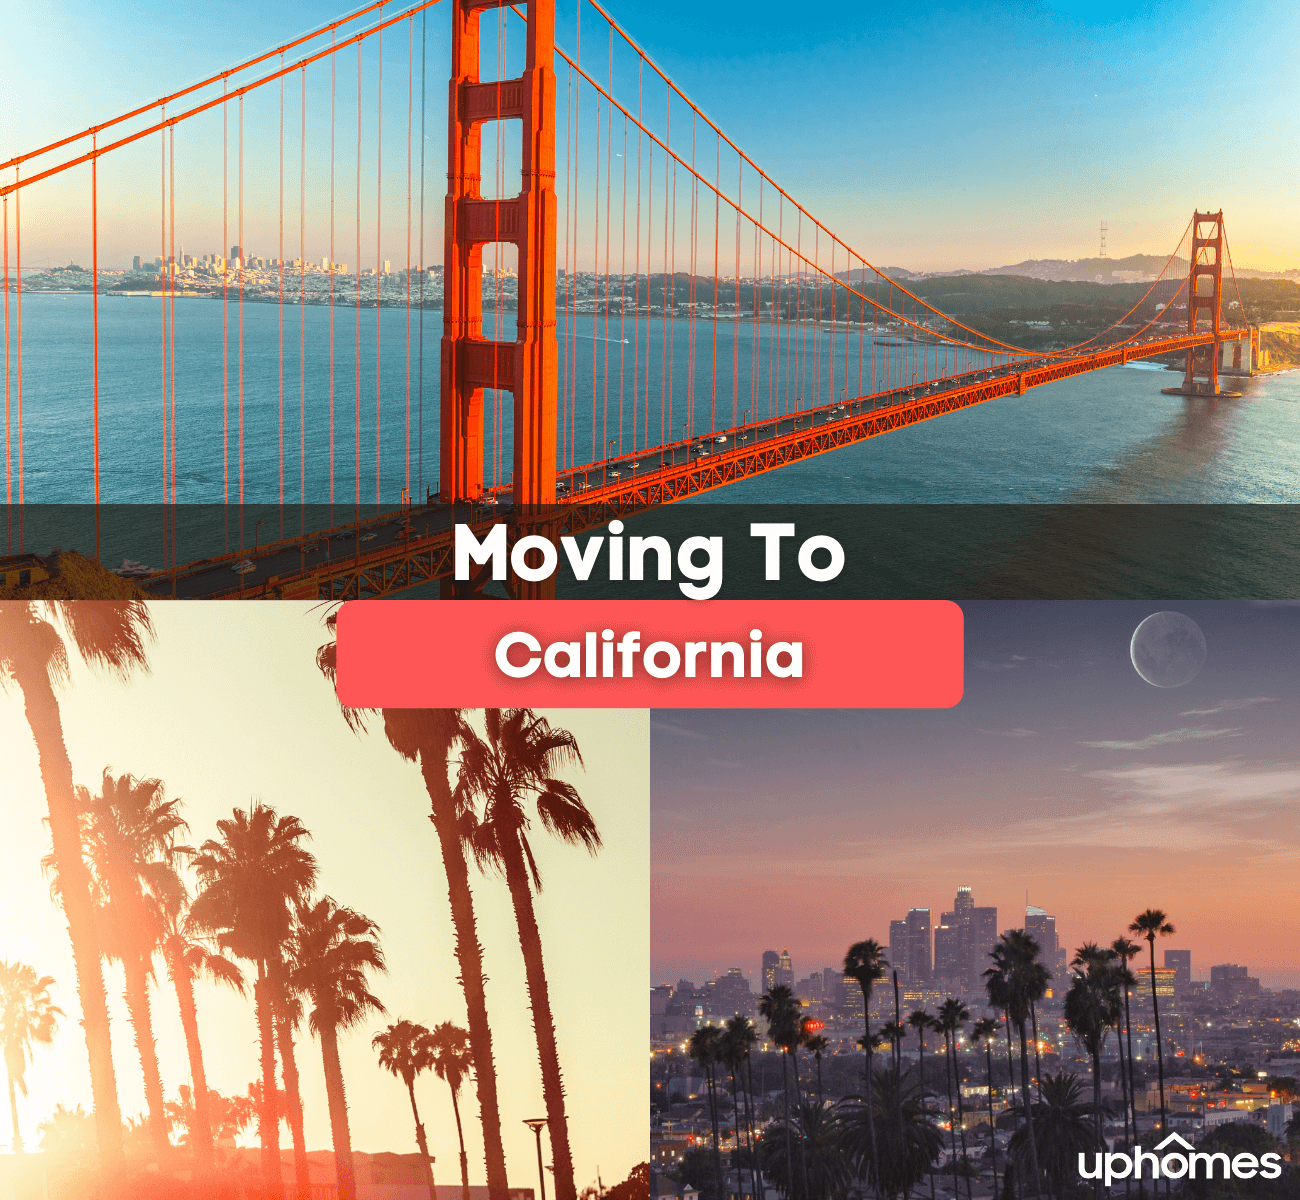 Moving to California - What is it like living in California?